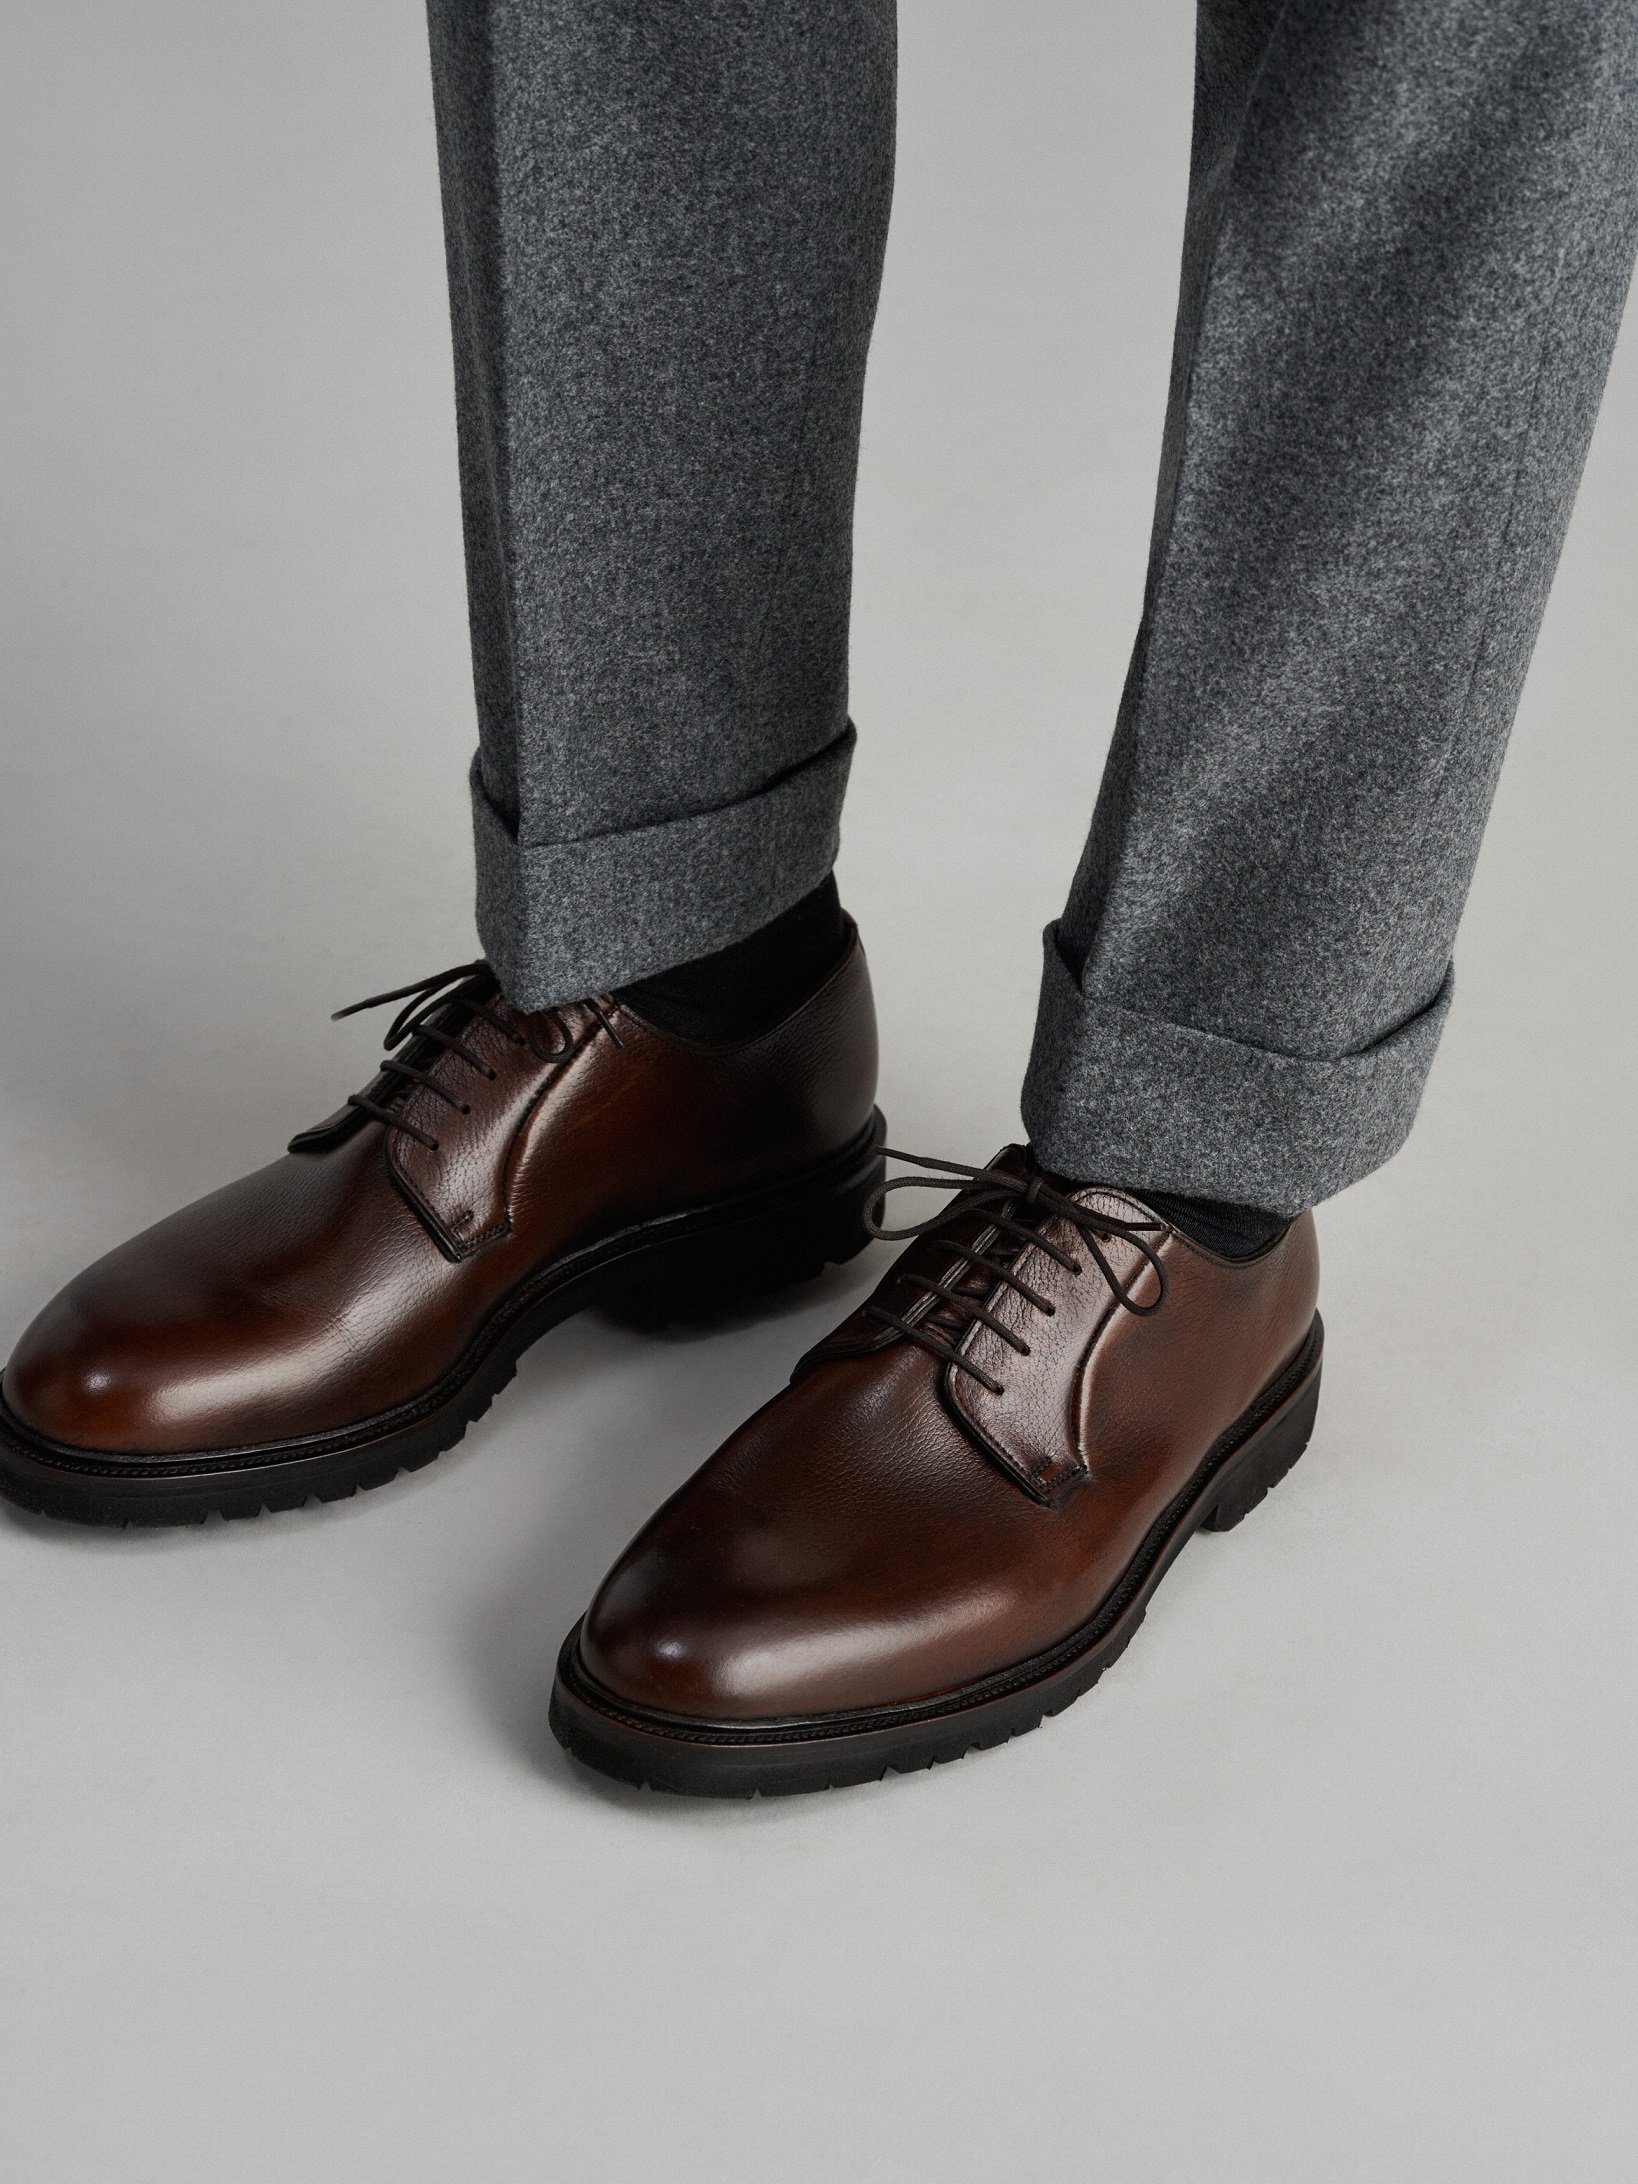 Thom Sweeney collaborates with George Cleverley on new footwear ...